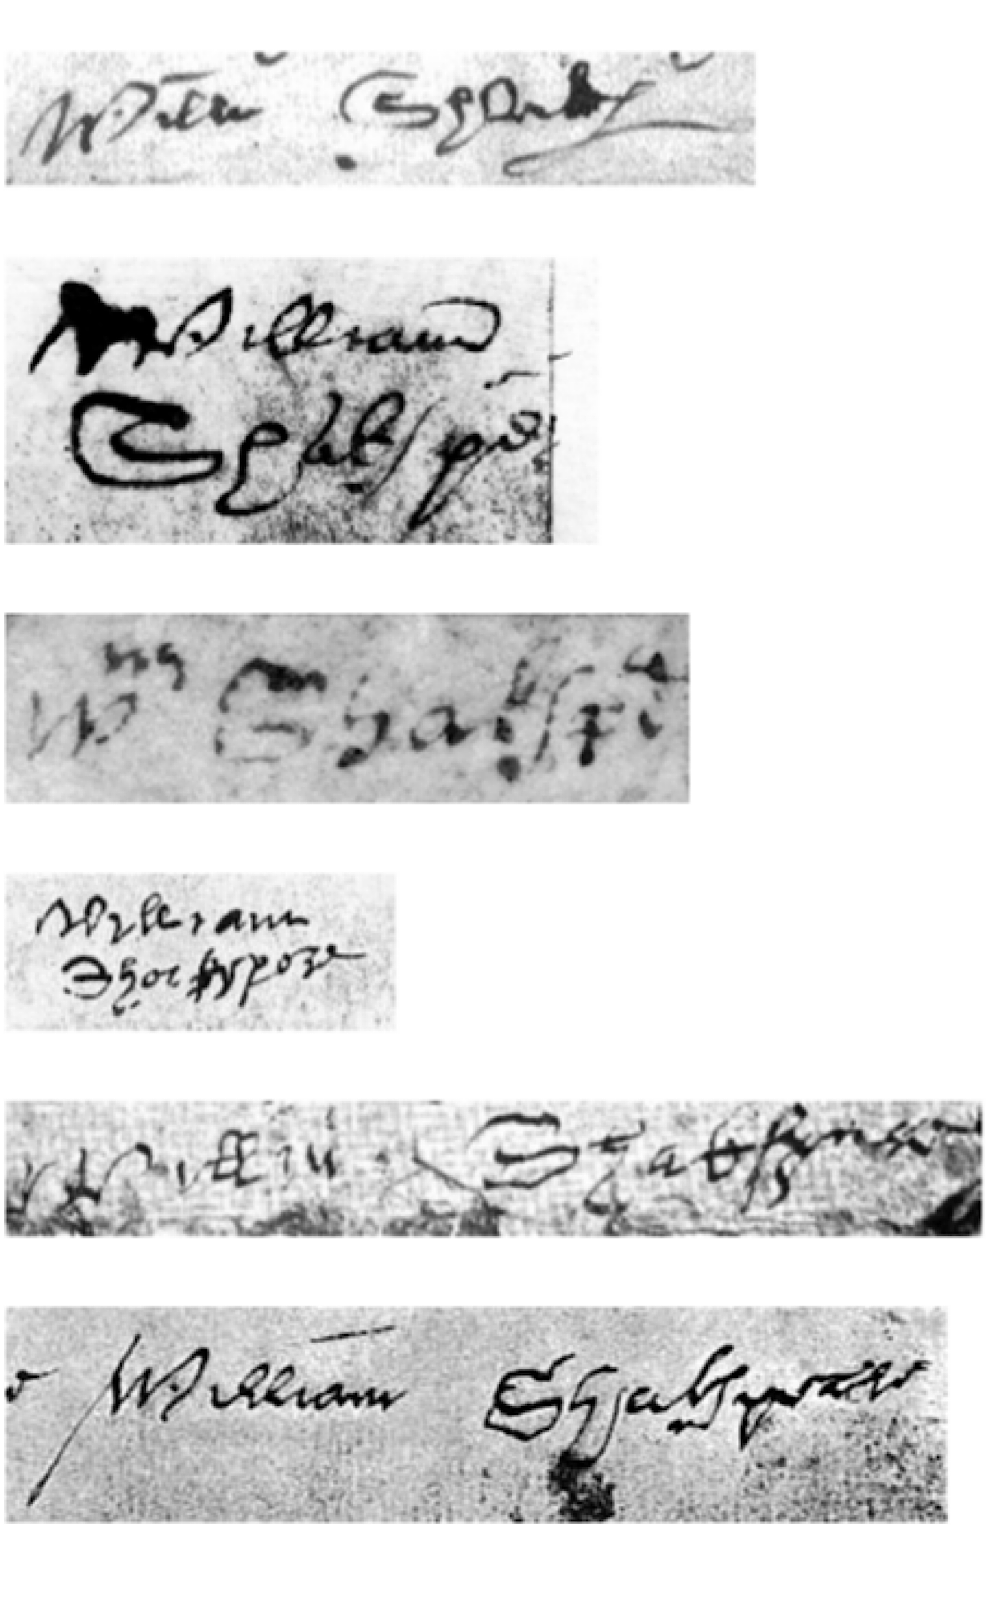 A collage shows six different signatures